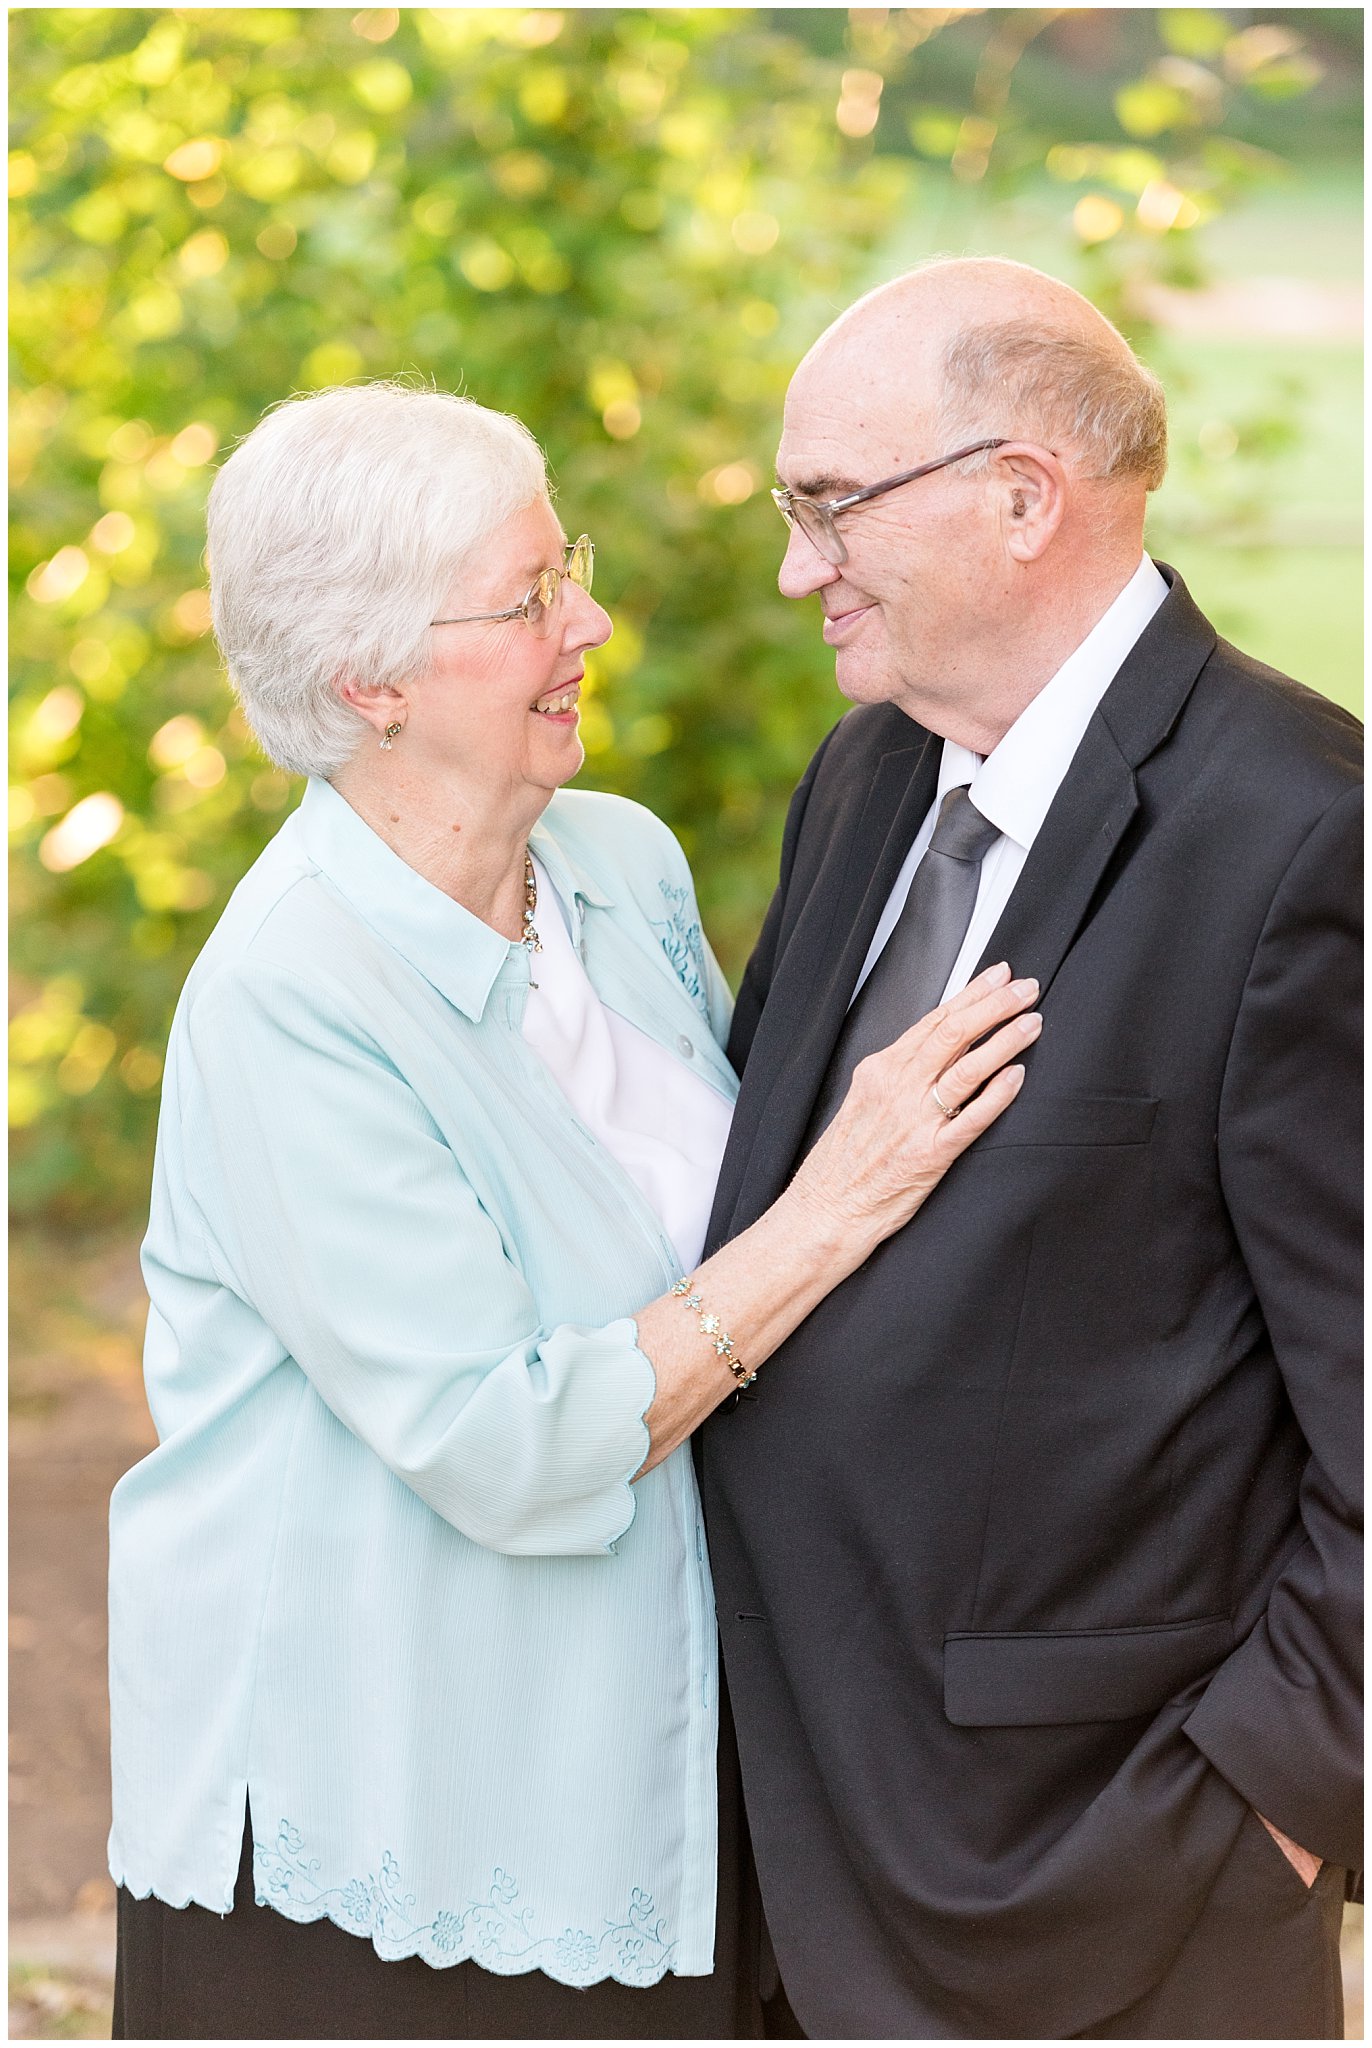 Grandparents looking at each other lovingly | Layton Commons Park | Layton Couples Photographer | Jessie and Dallin